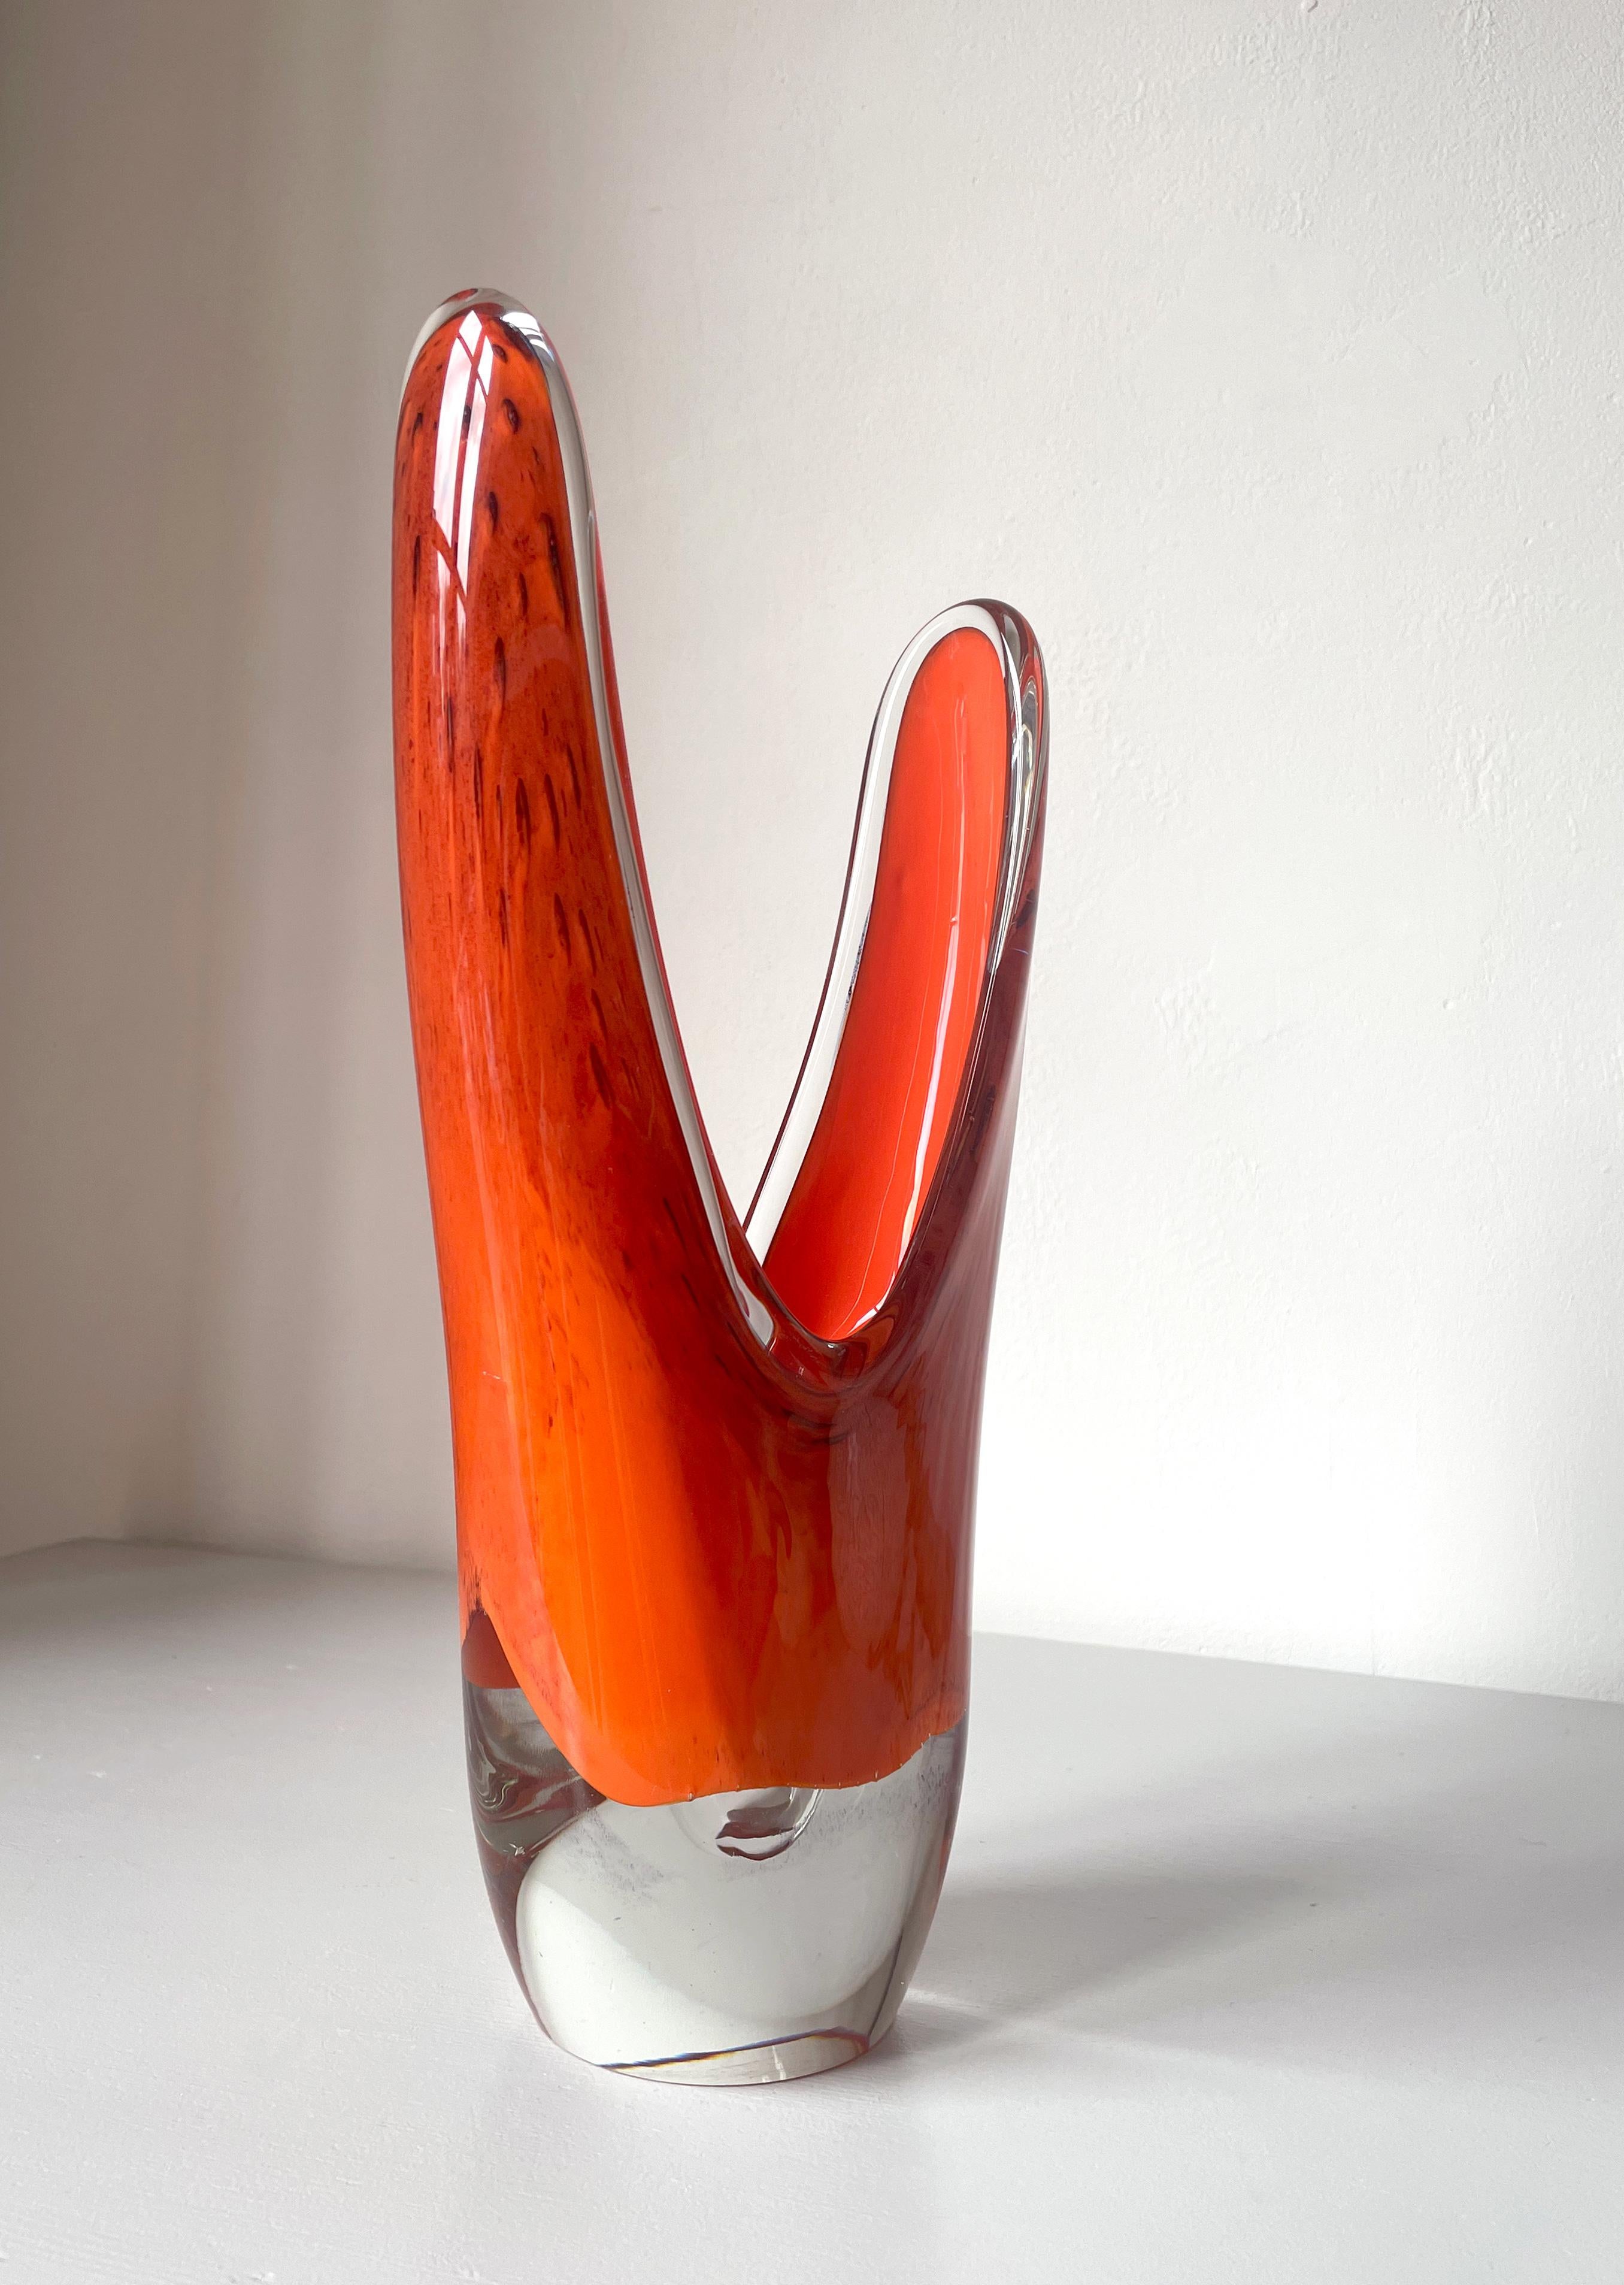 Sculptural asymmetrical mouth blown art glass vase. Encased deep orange glass with black accents and clear solid base. Scandinavian organic modern piece designed and handmade in the 1950s in the style of Flygsfors, Murano and Holmegaard. Beautiful